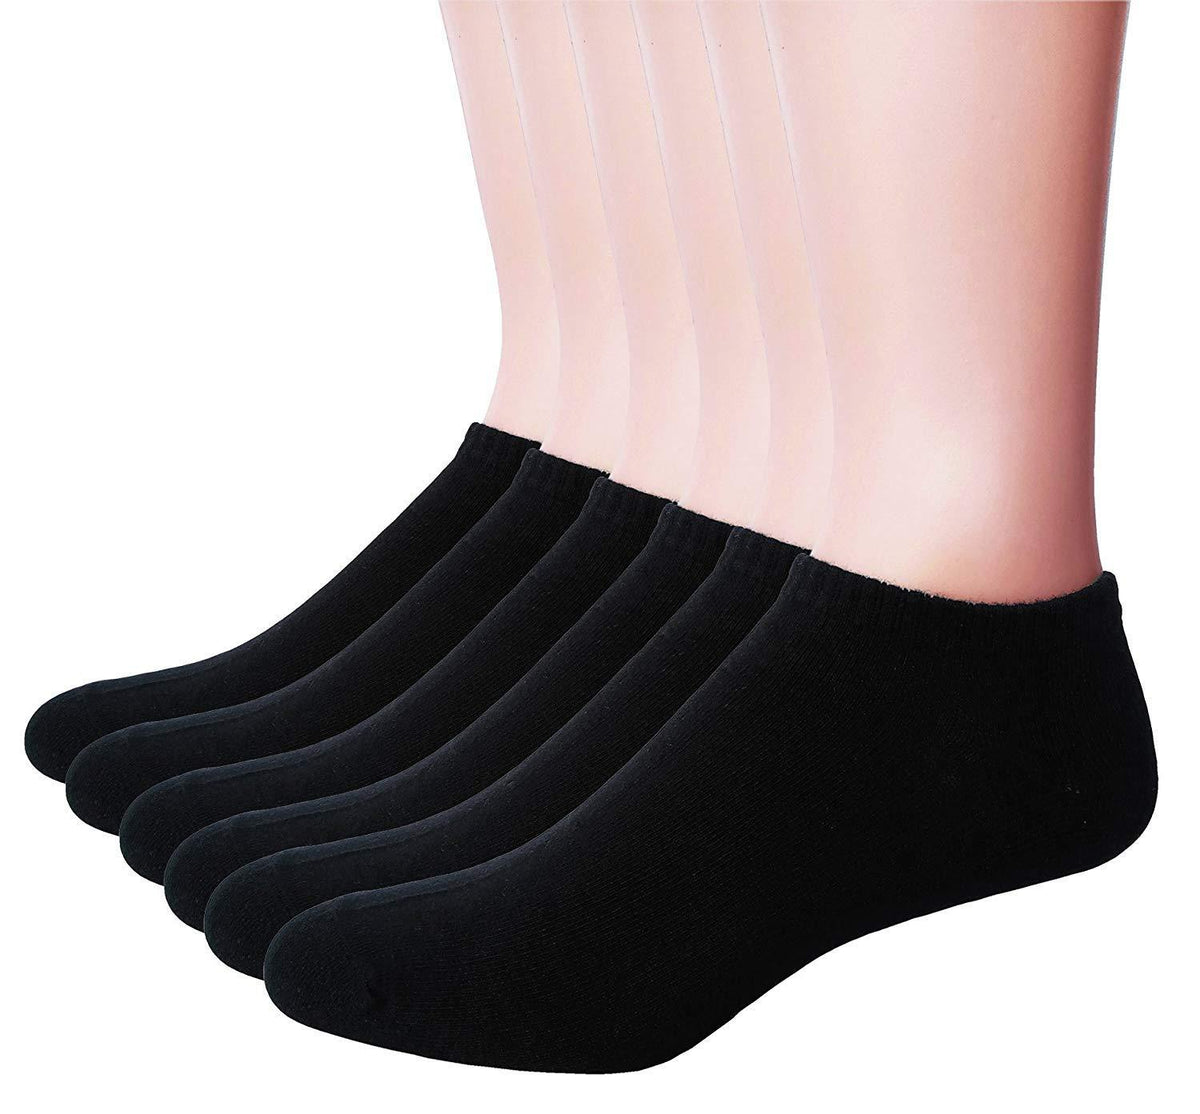 Footprints Organic Cotton Bamboo Low cut Casual Daily wear Socks - Unisex- Pack of 6 Pairs - Black